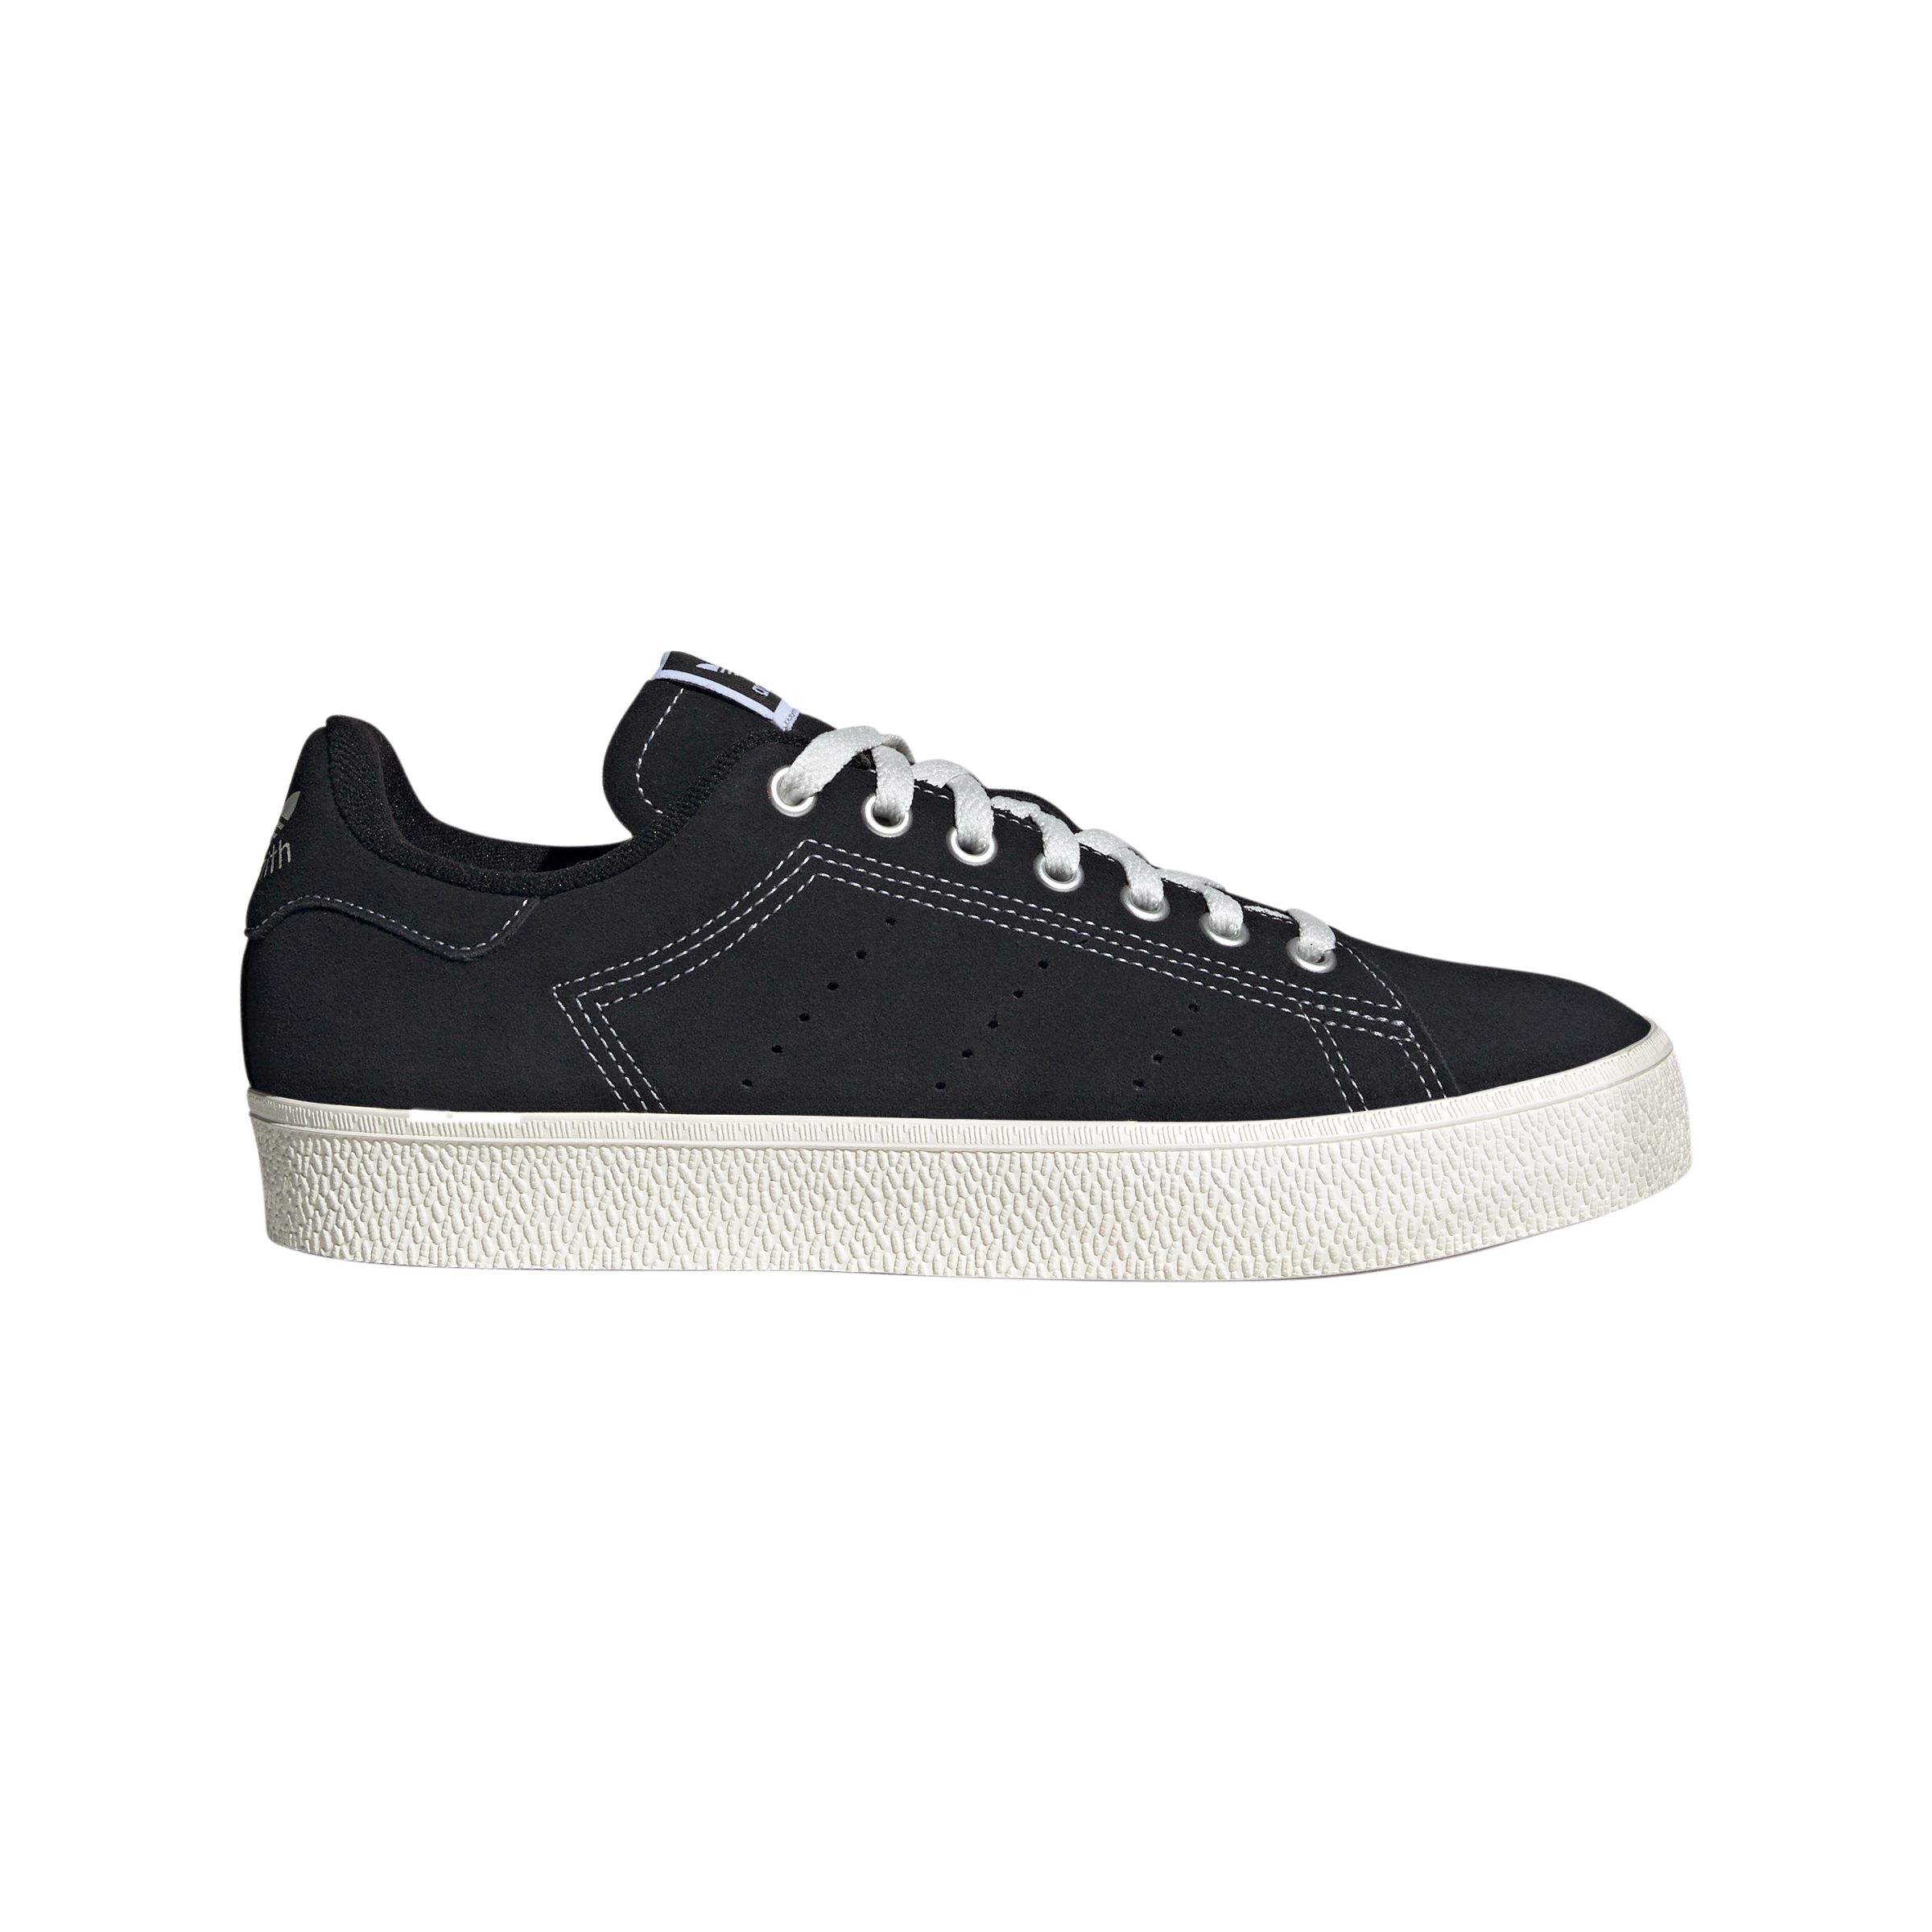 Image of adidas Men's OG Stan Smith CS Shoes Sneakers